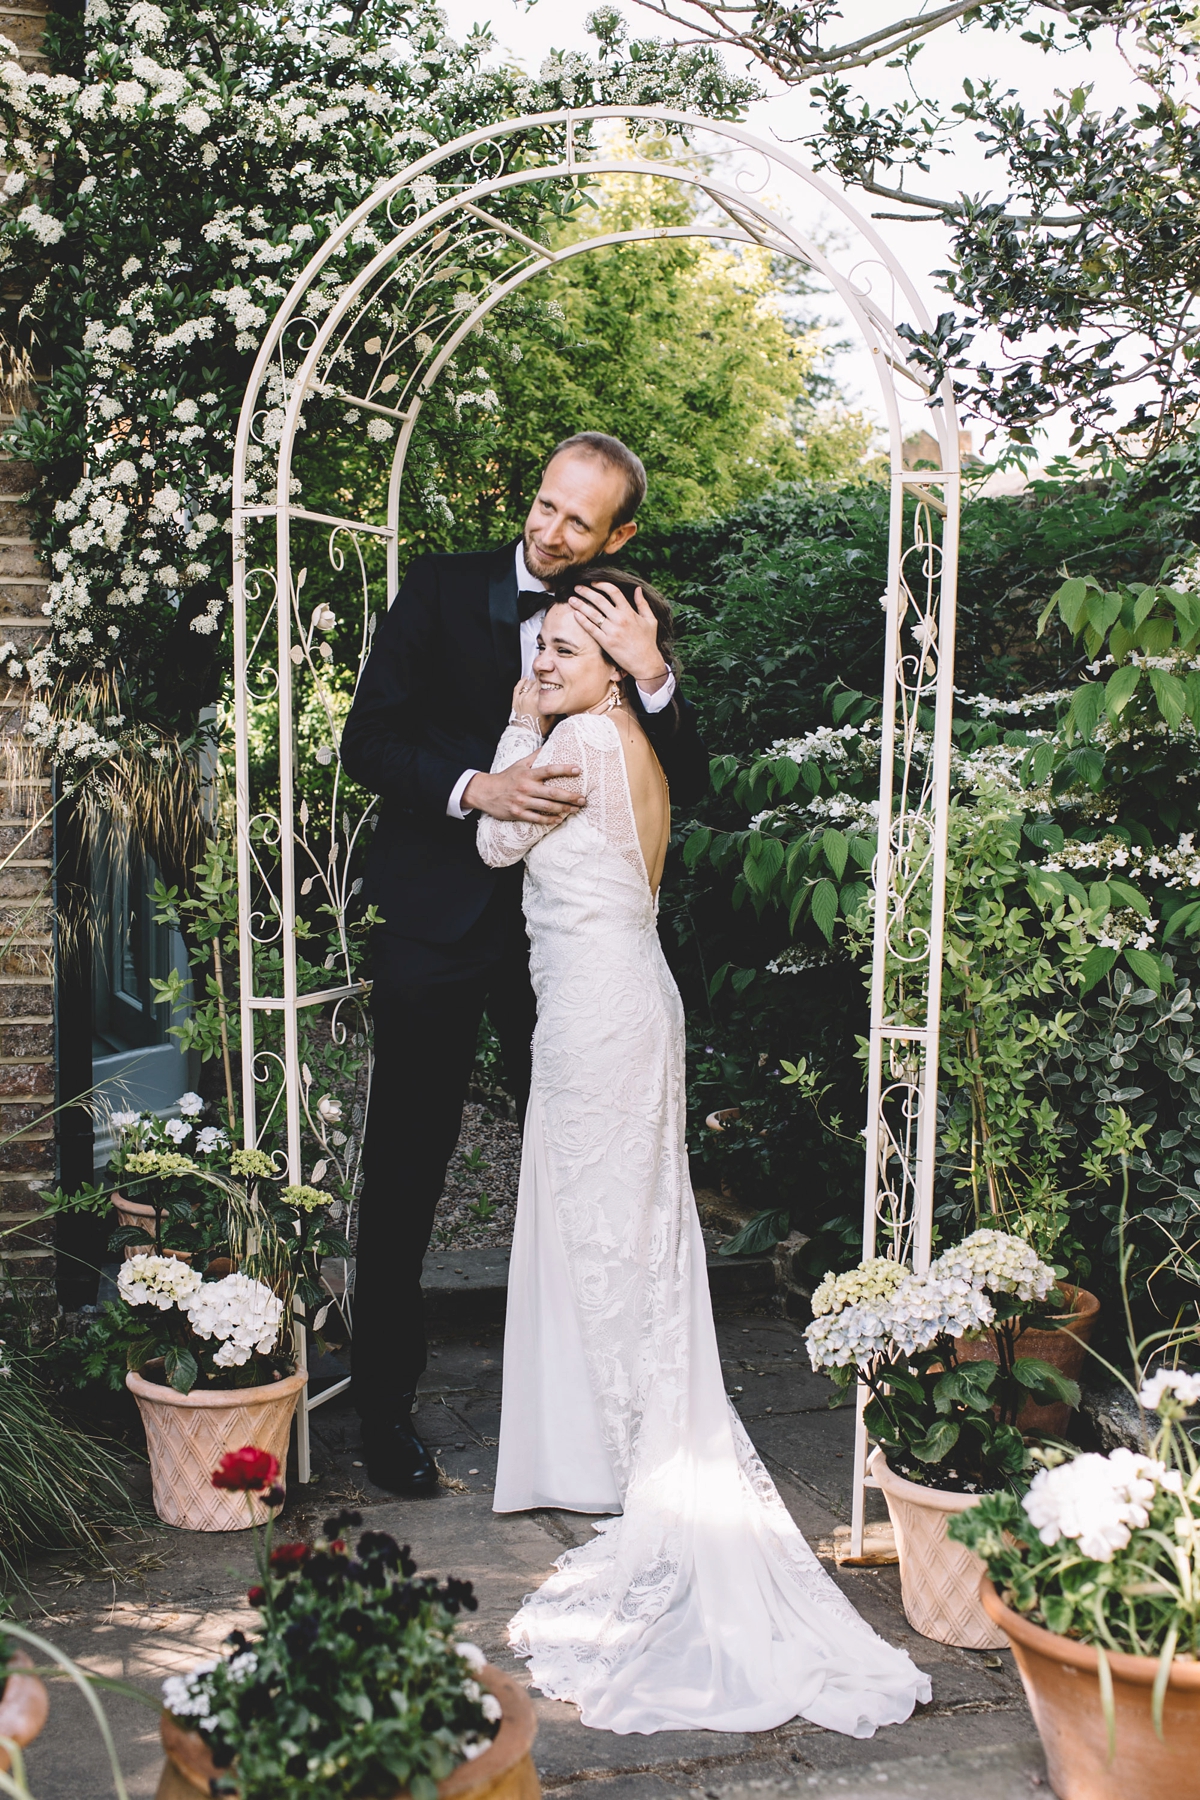 8 A Grace Loves Lace gown for a DIY garden wedding inspired by nature and flowers 1